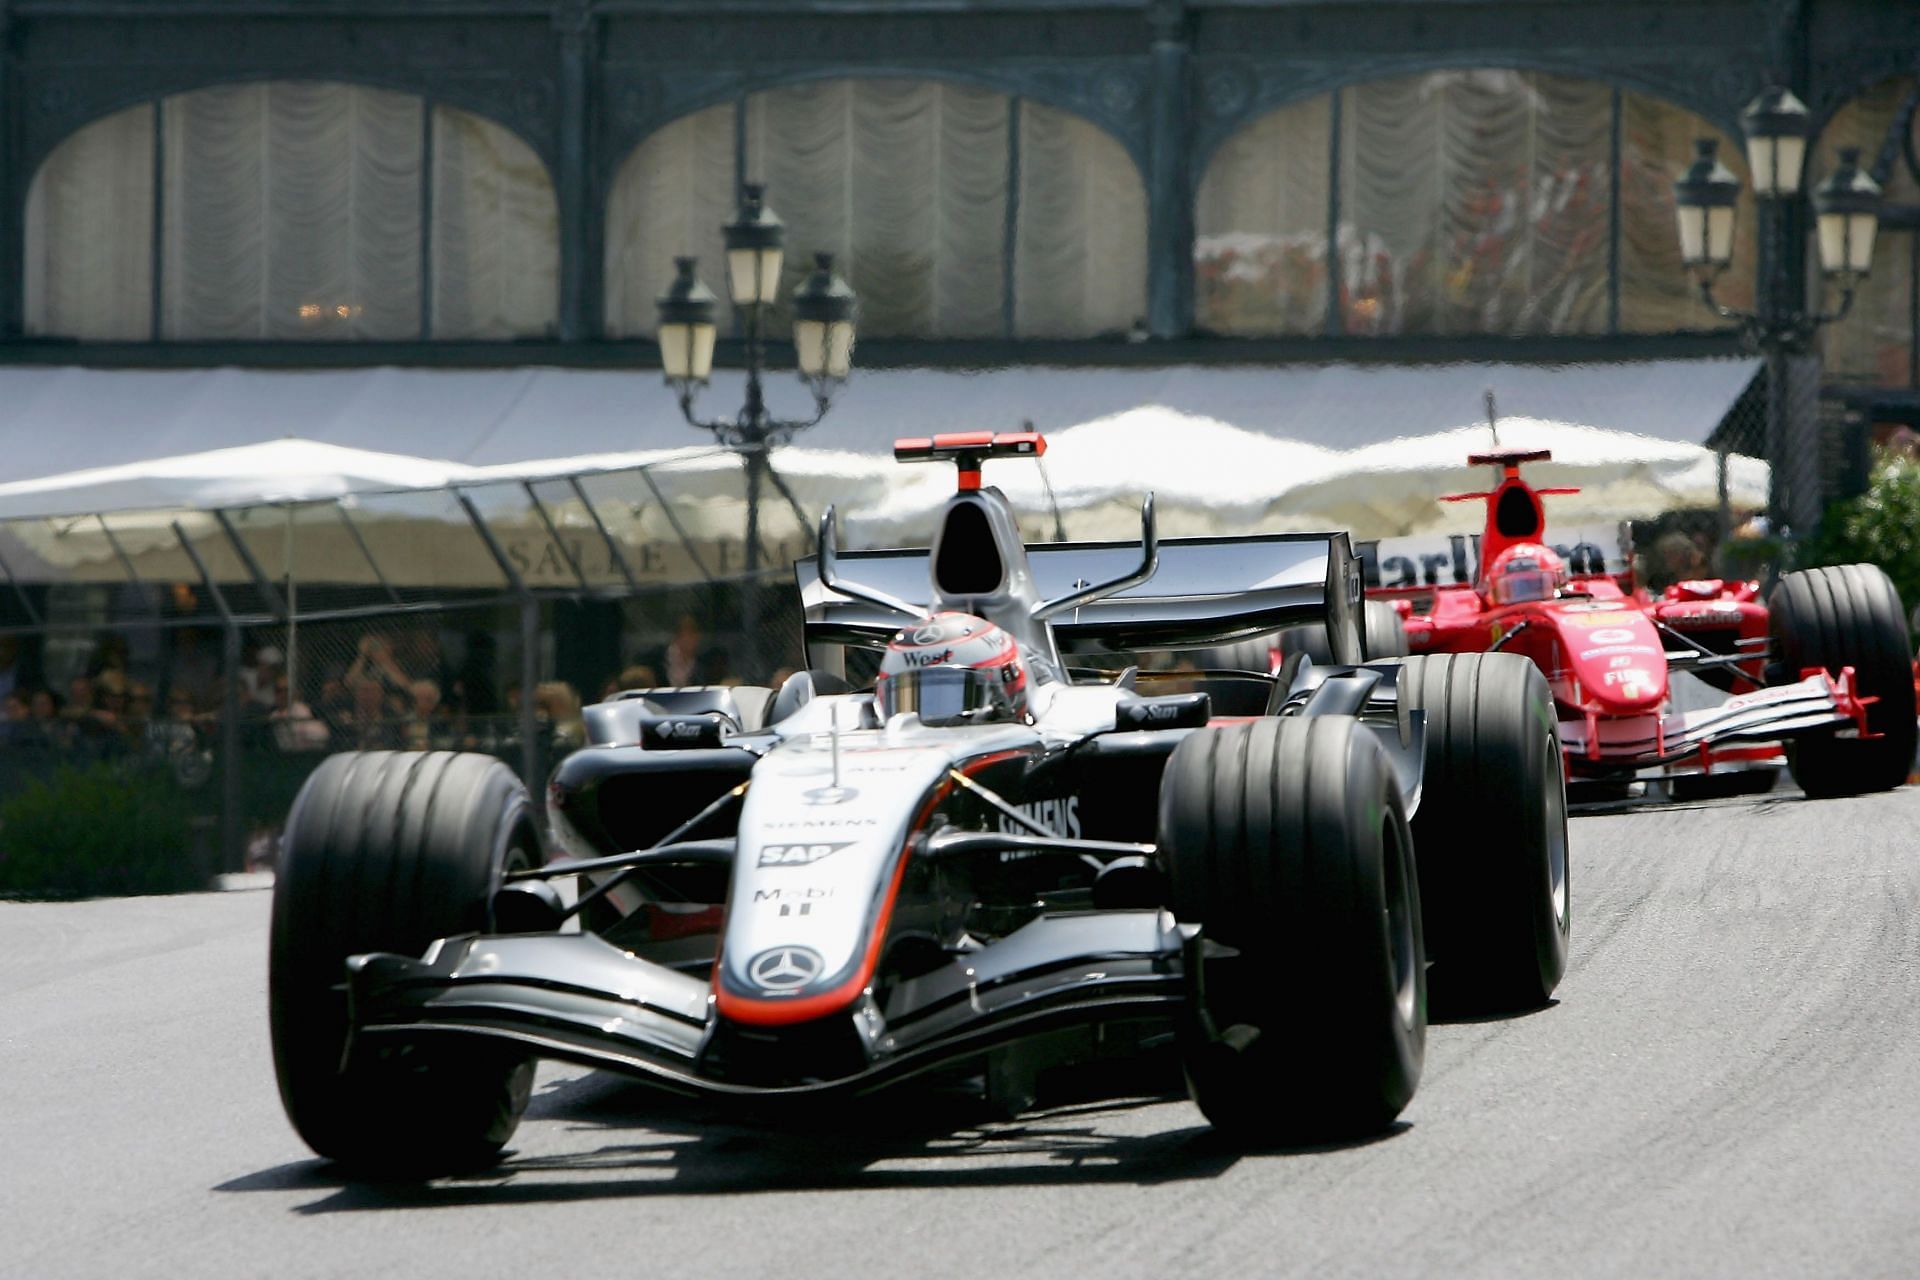 Kimi Raikkonen was on a different level from everyone else in the 2005 Monaco GP